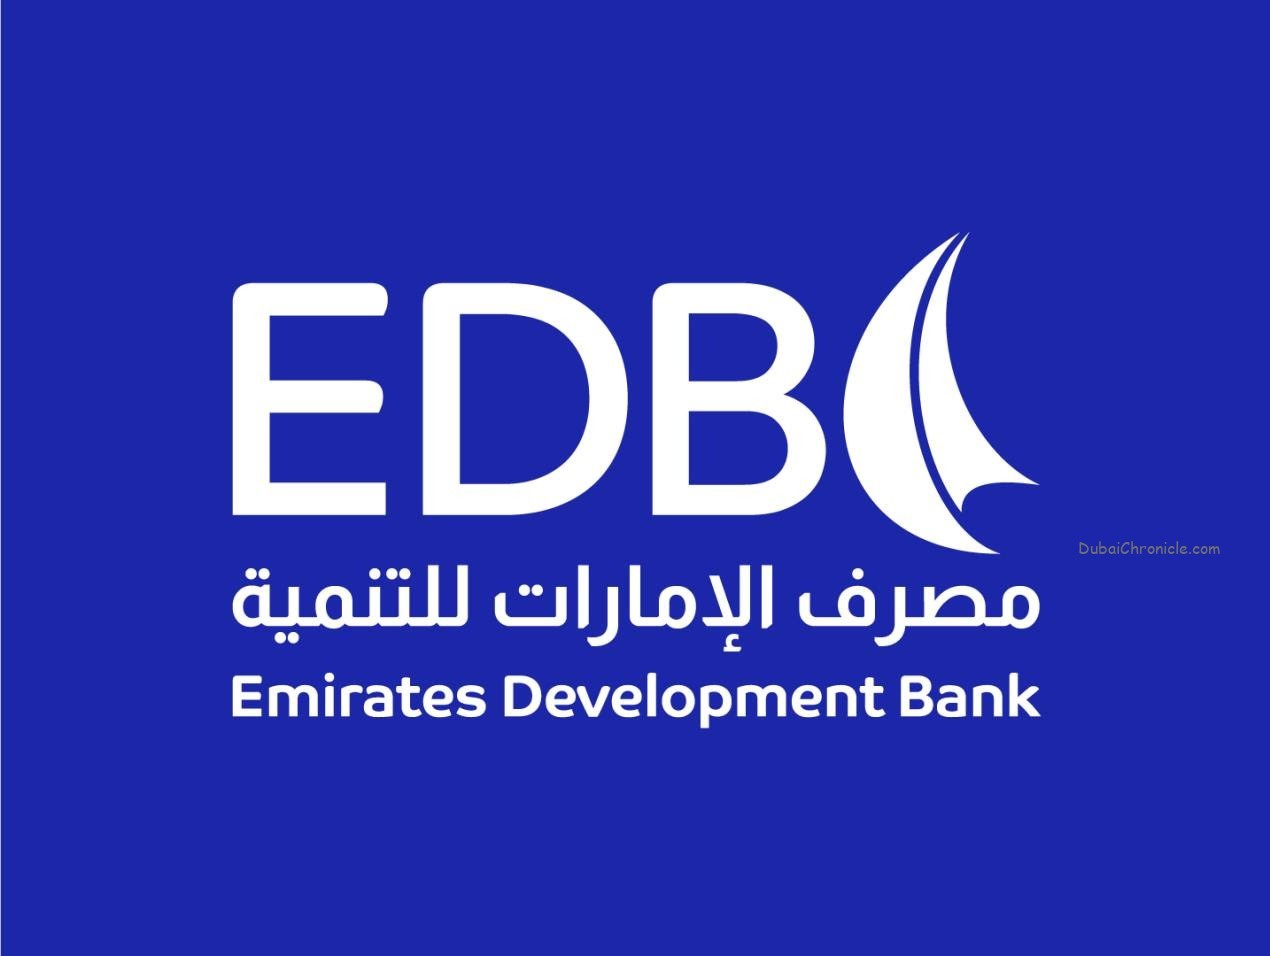 Emirates Development Bank [EDB] today announced that it has signed an agreement with Beehive, the UAE’s first Peer-to-Peer lending platform.